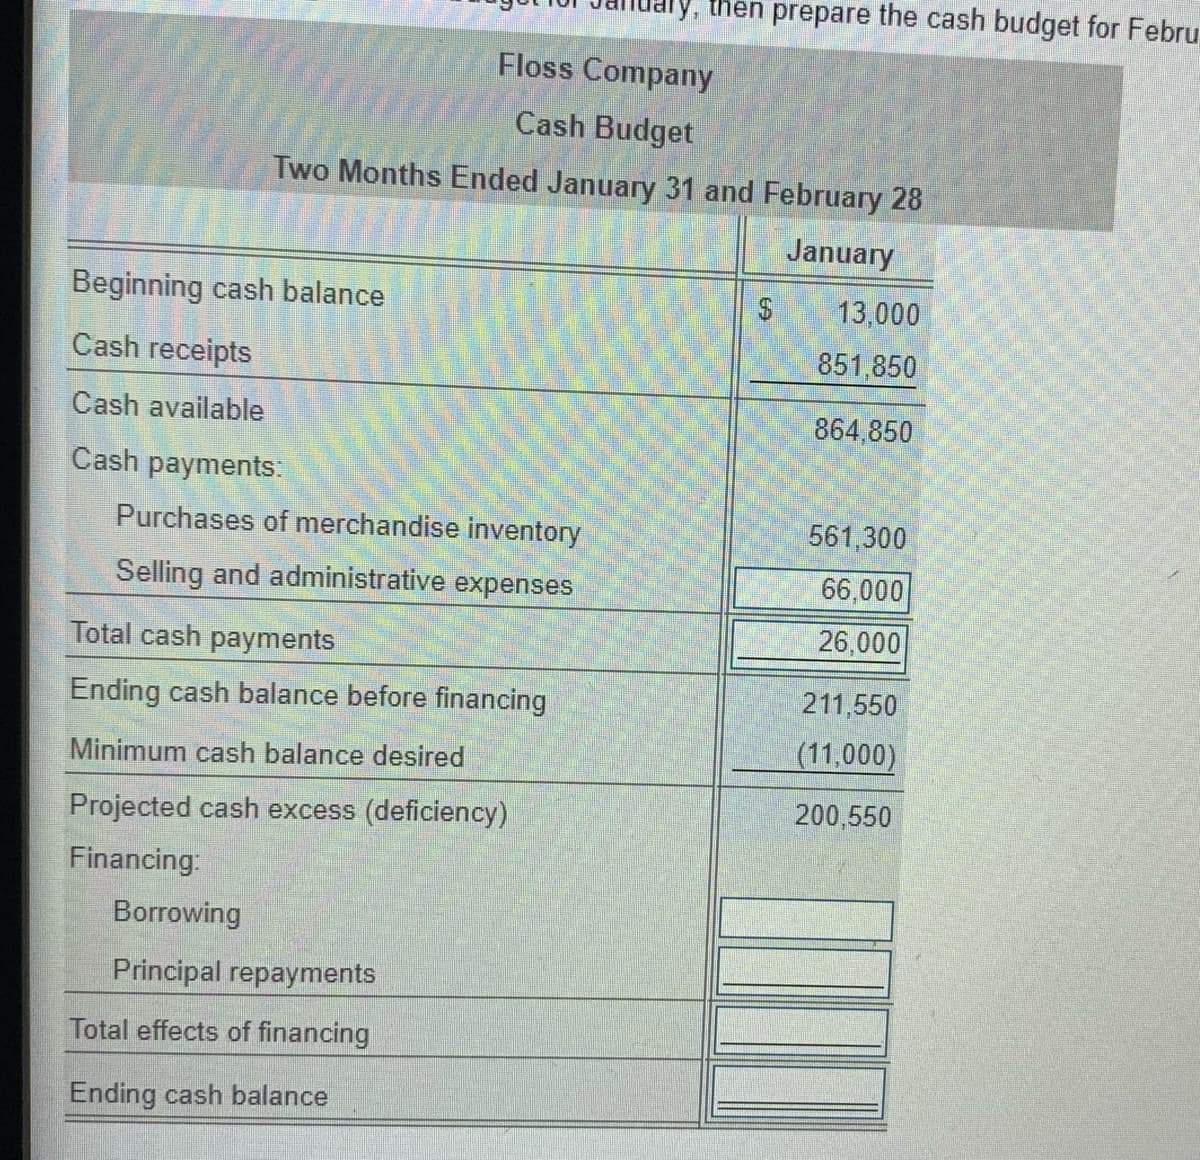 then prepare the cash budget for Febru
Floss Company
Cash Budget
Two Months Ended January 31 and February 28
January
Beginning cash balance
2$
13,000
Cash receipts
851,850
Cash available
864,850
Cash payments:
Purchases of merchandise inventory
561,300
Selling and administrative expenses
66,000
Total cash payments
26,000
Ending cash balance before financing
211,550
(11,000)
Minimum cash balance desired
200,550
Projected cash excess (deficiency)
Financing:
Borrowing
Principal repayments
Total effects of financing
Ending cash balance
